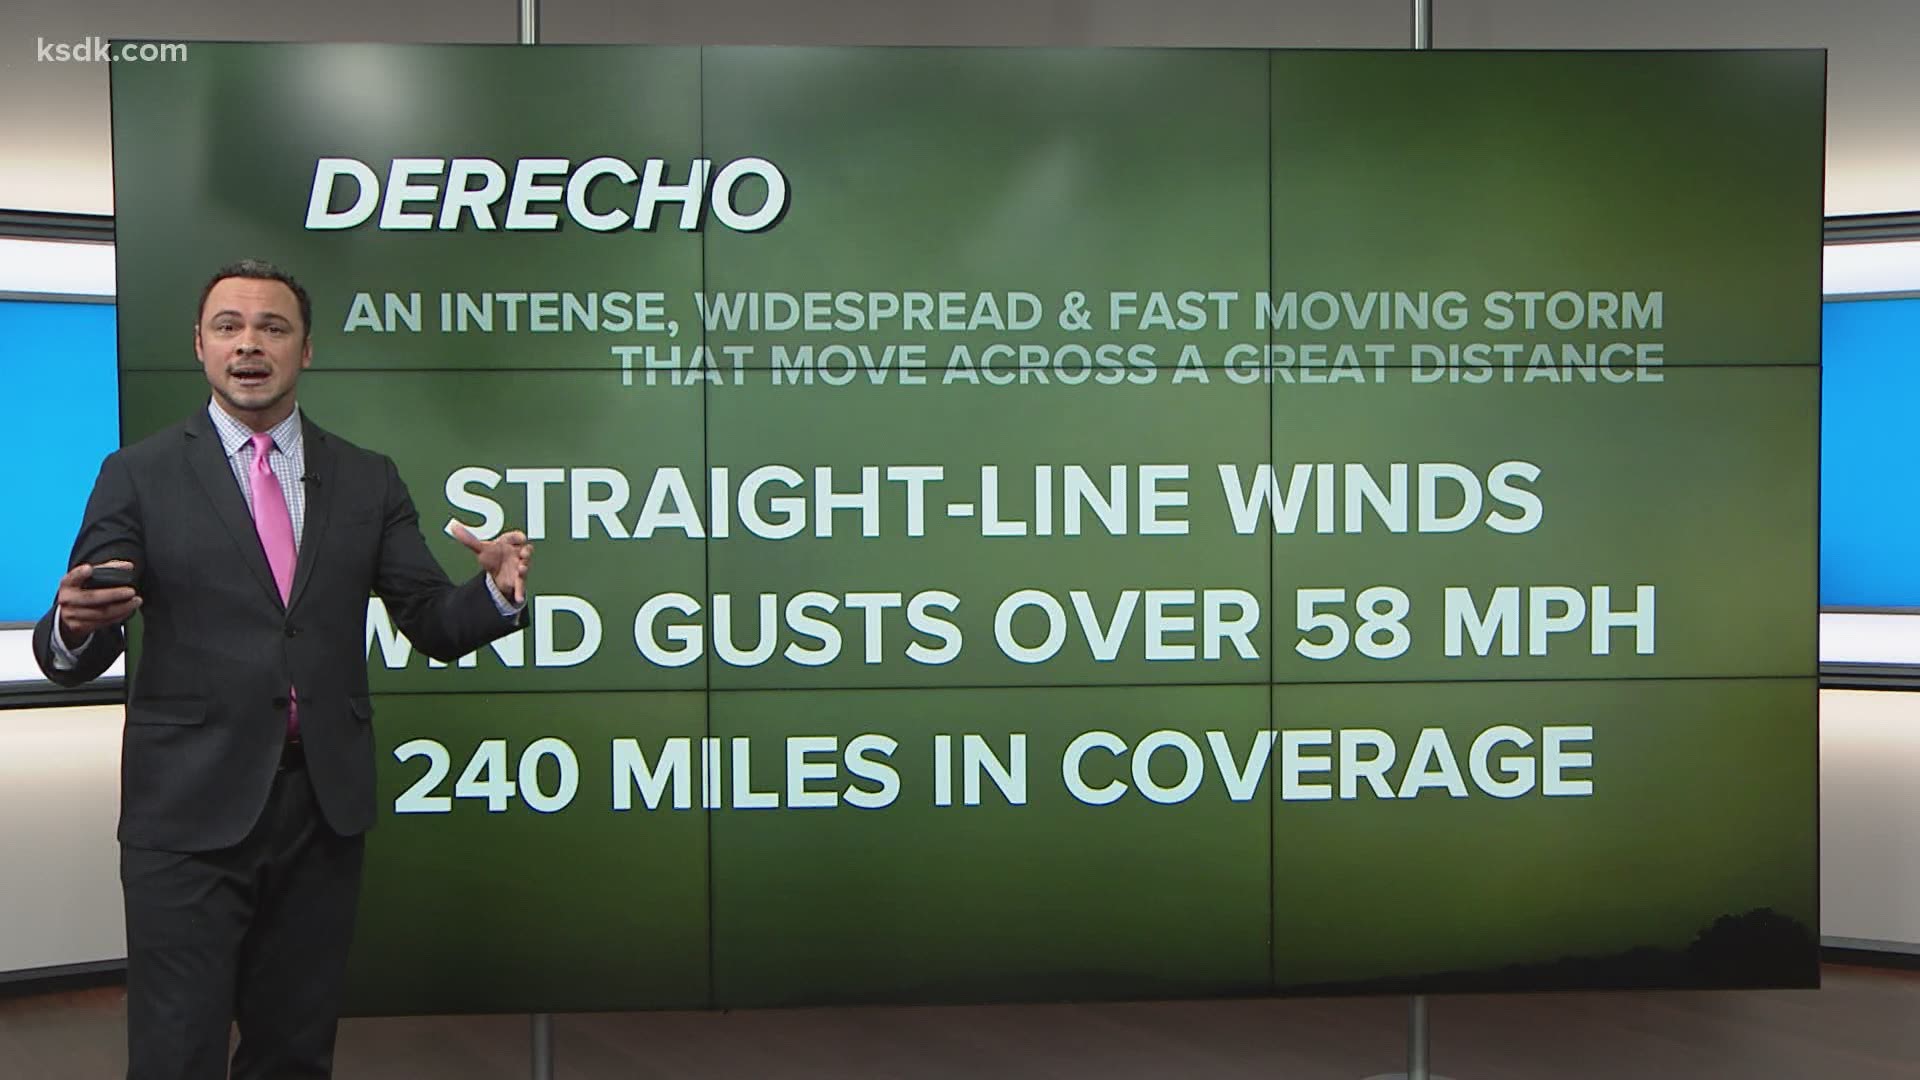 5 On Your Side meteorologist Anthony Slaughter explains what a derecho is and how it's different from a tornado.